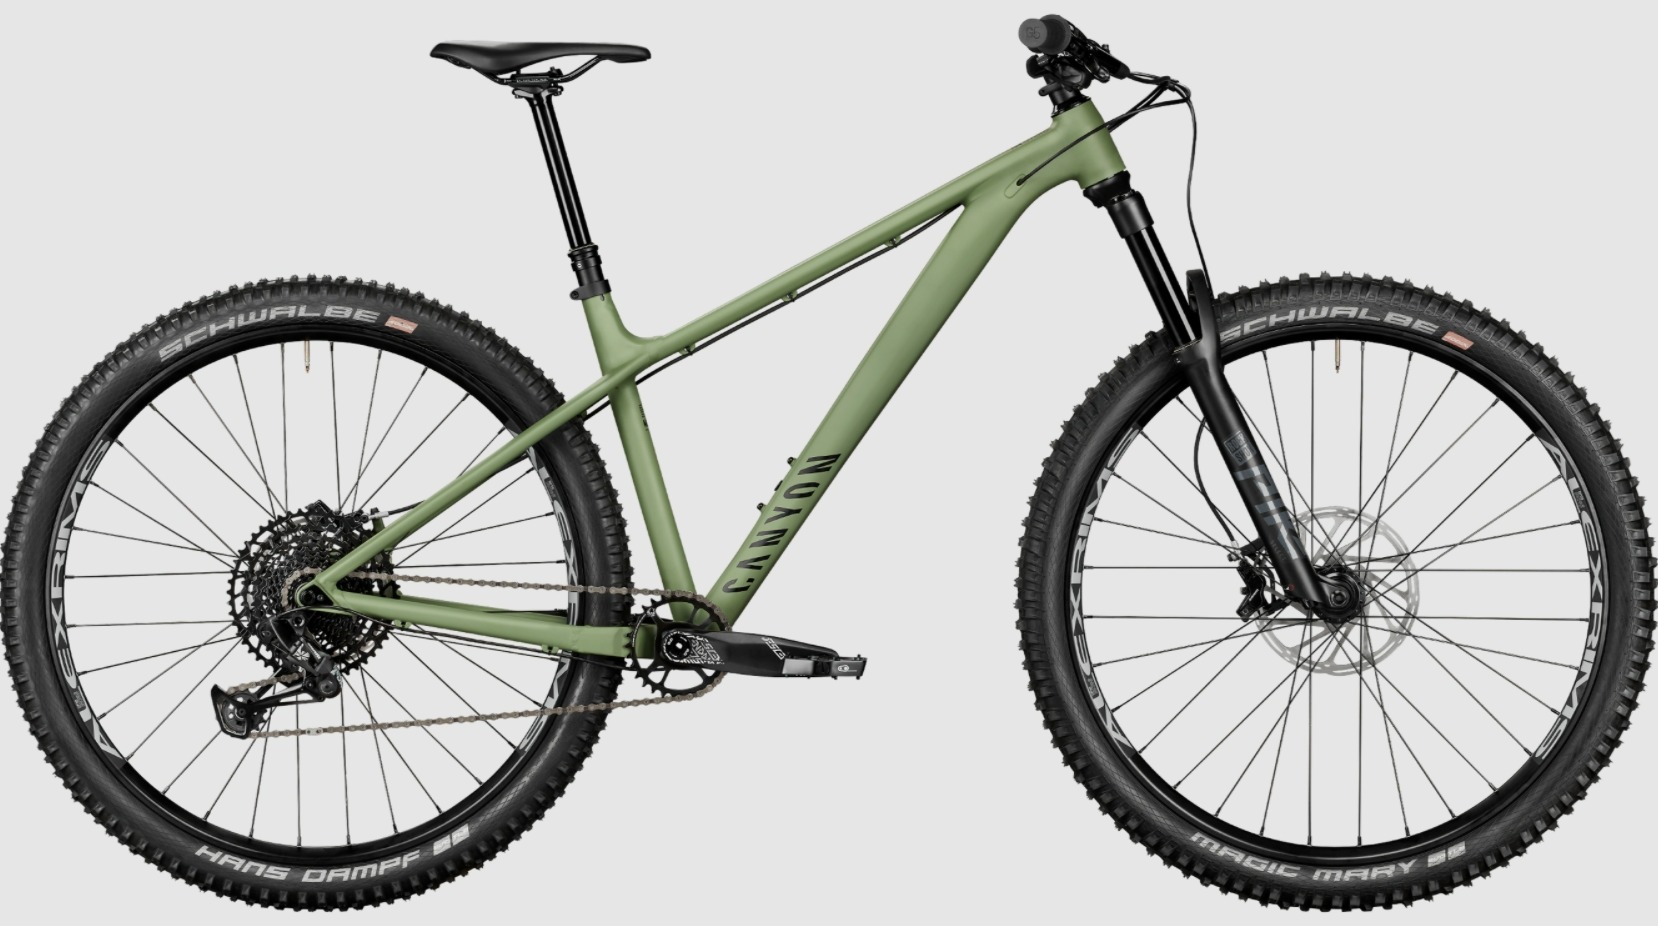 Canyon Drops Capable Stoic 4 MTB Meant to Keep Up With Full-Suspension